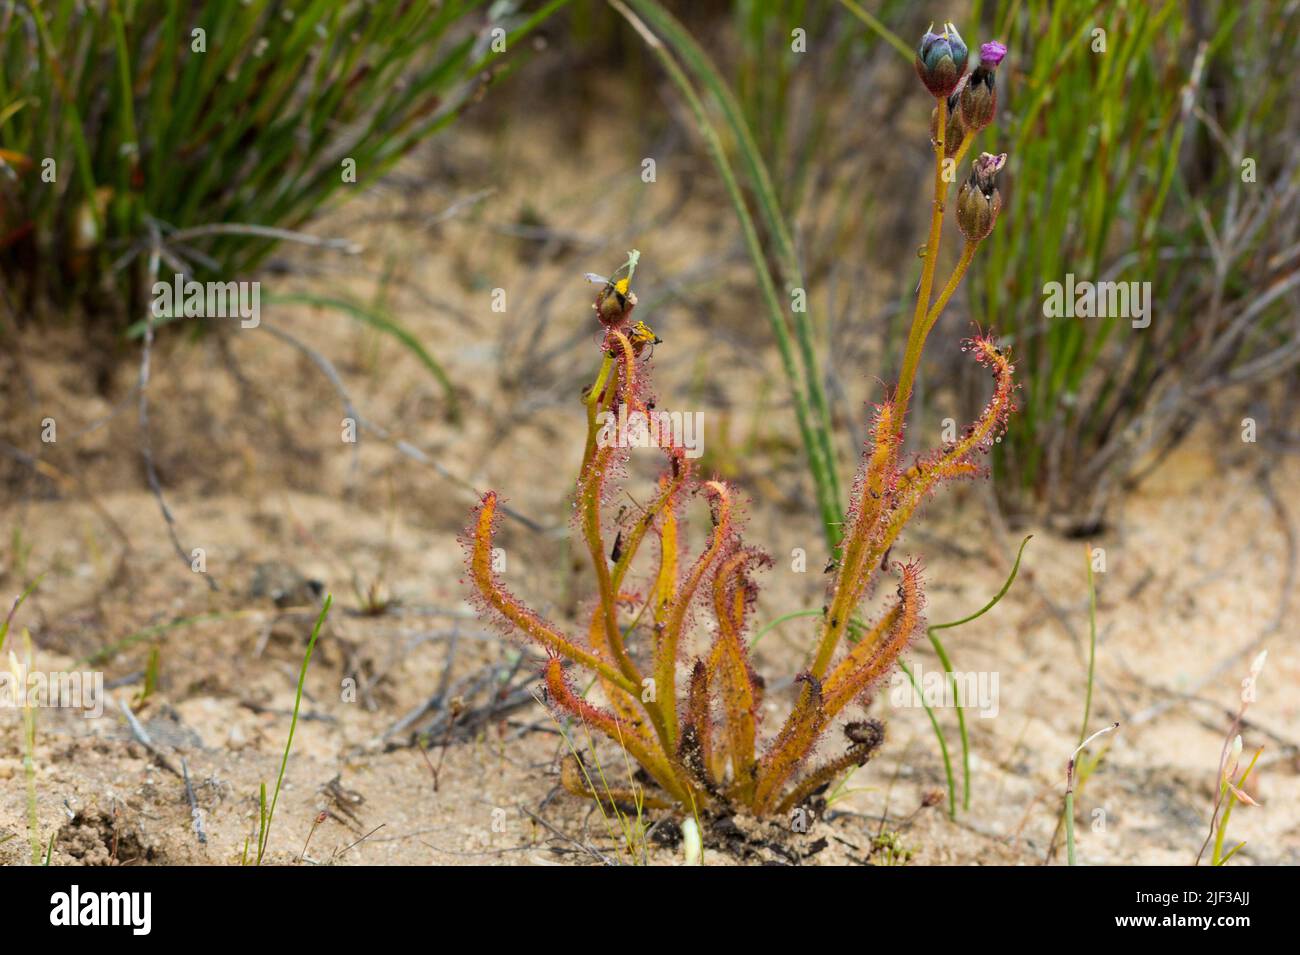 South African Wildflowers: Drosera cistiflroa (a carnivorous plant) seen on the Bokkeveld Plateau in the Northern Cape of South Africa Stock Photo